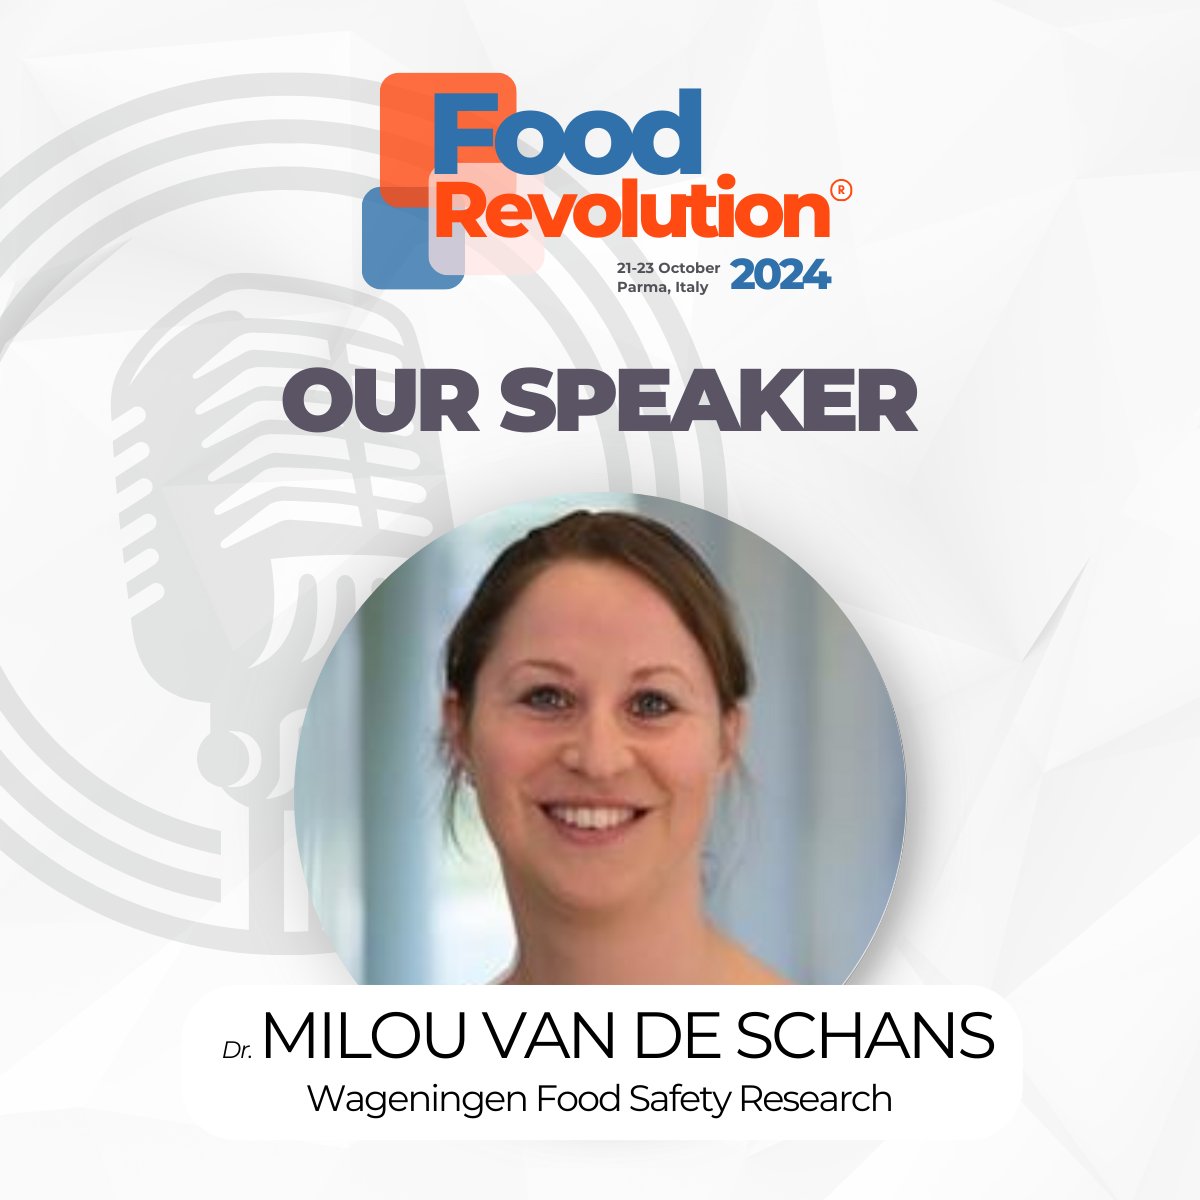 🎙️Here to introduce another esteemed speaker: Dr. Milou van de Schans, from the renowned Wageningen Food Safety Research.

She will share her expertise on #foodsafety in circular food production systems. #CircularEconomy 

Join us:
📅 Date: October 21-23
 📍 Location: Parma, IT